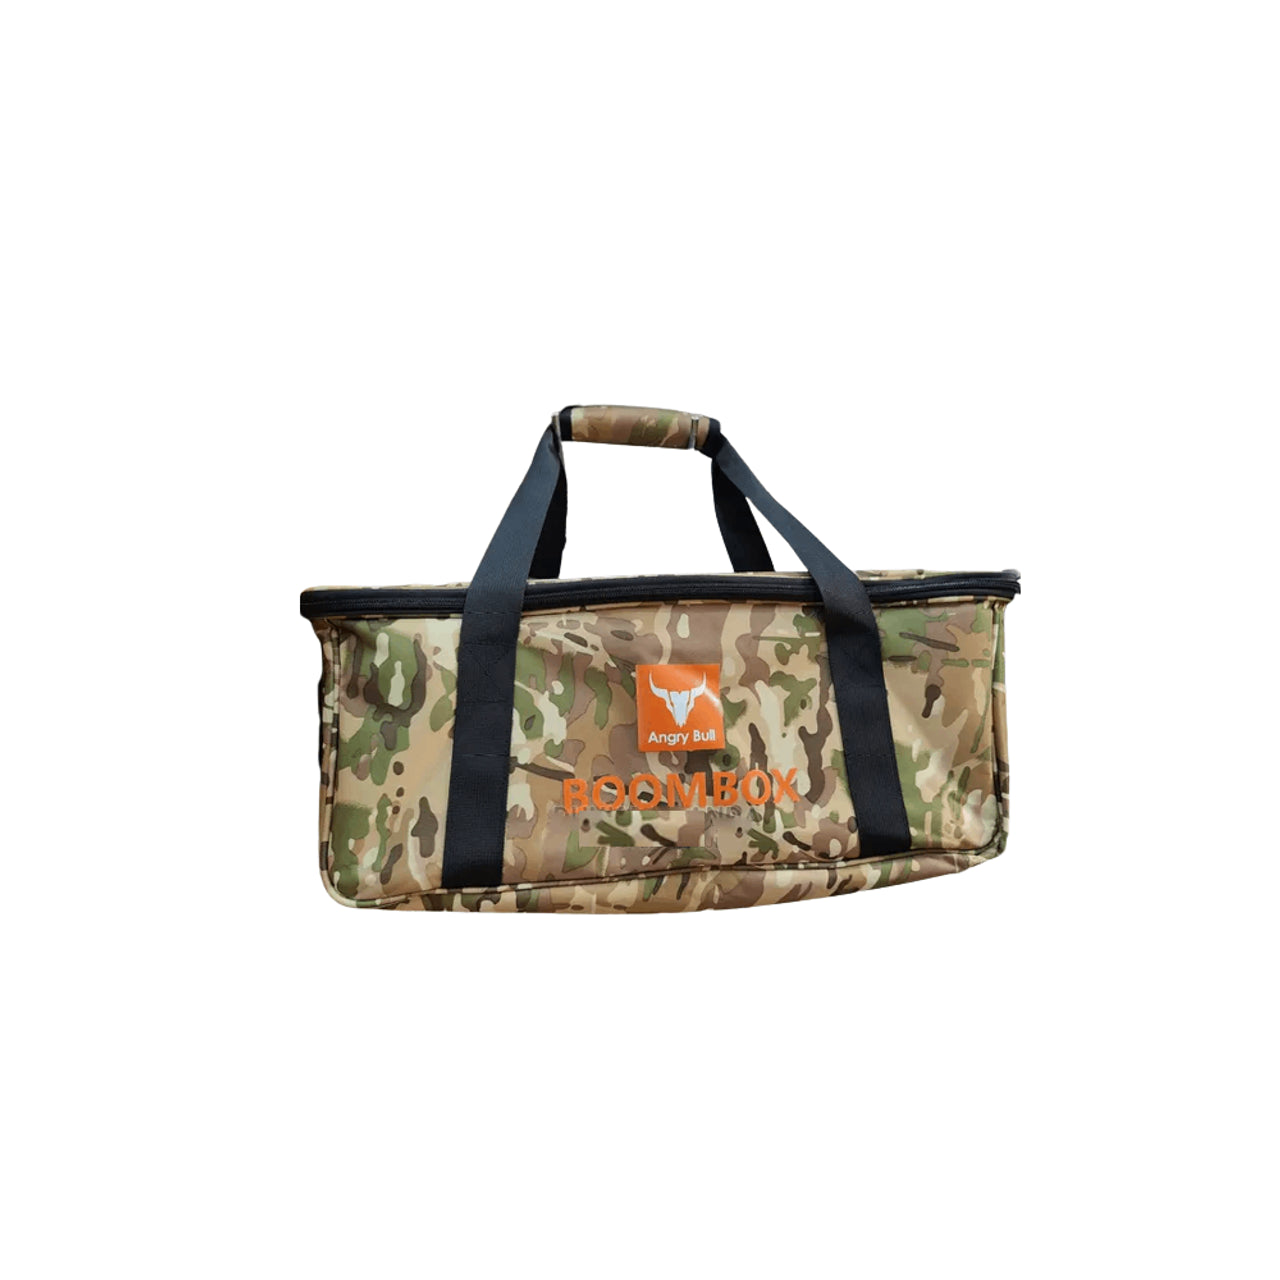 Carrying Case Portable Tote Bag JBL Boombox 3/2